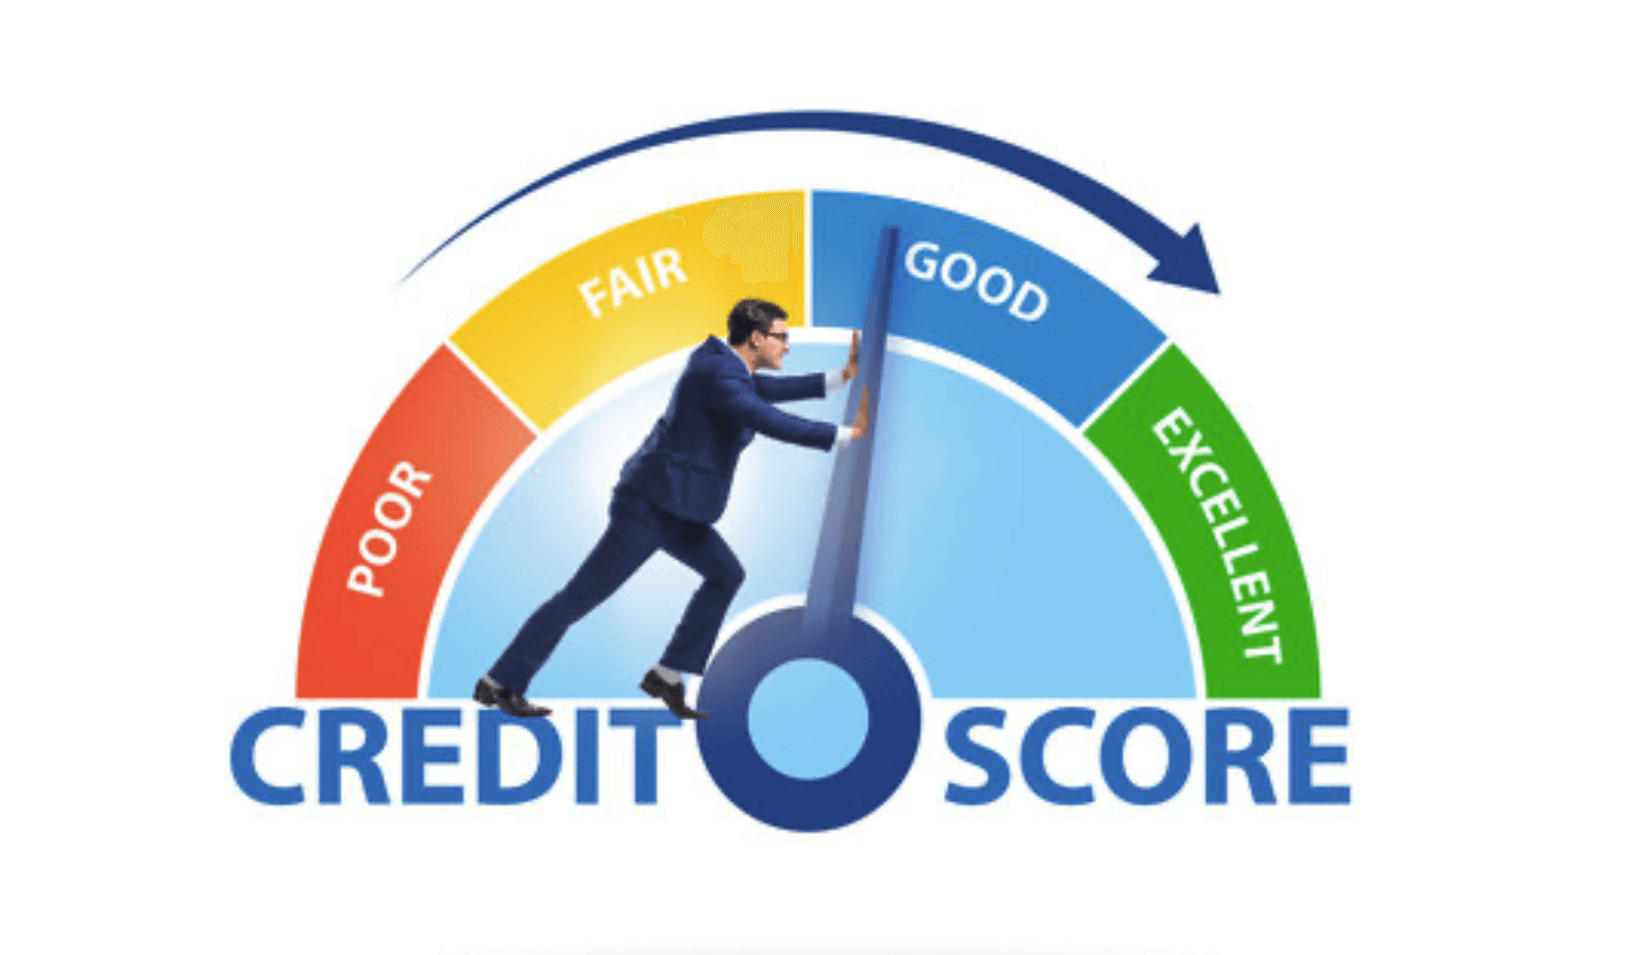 Illustration of man pushing dial of credit score to excellent